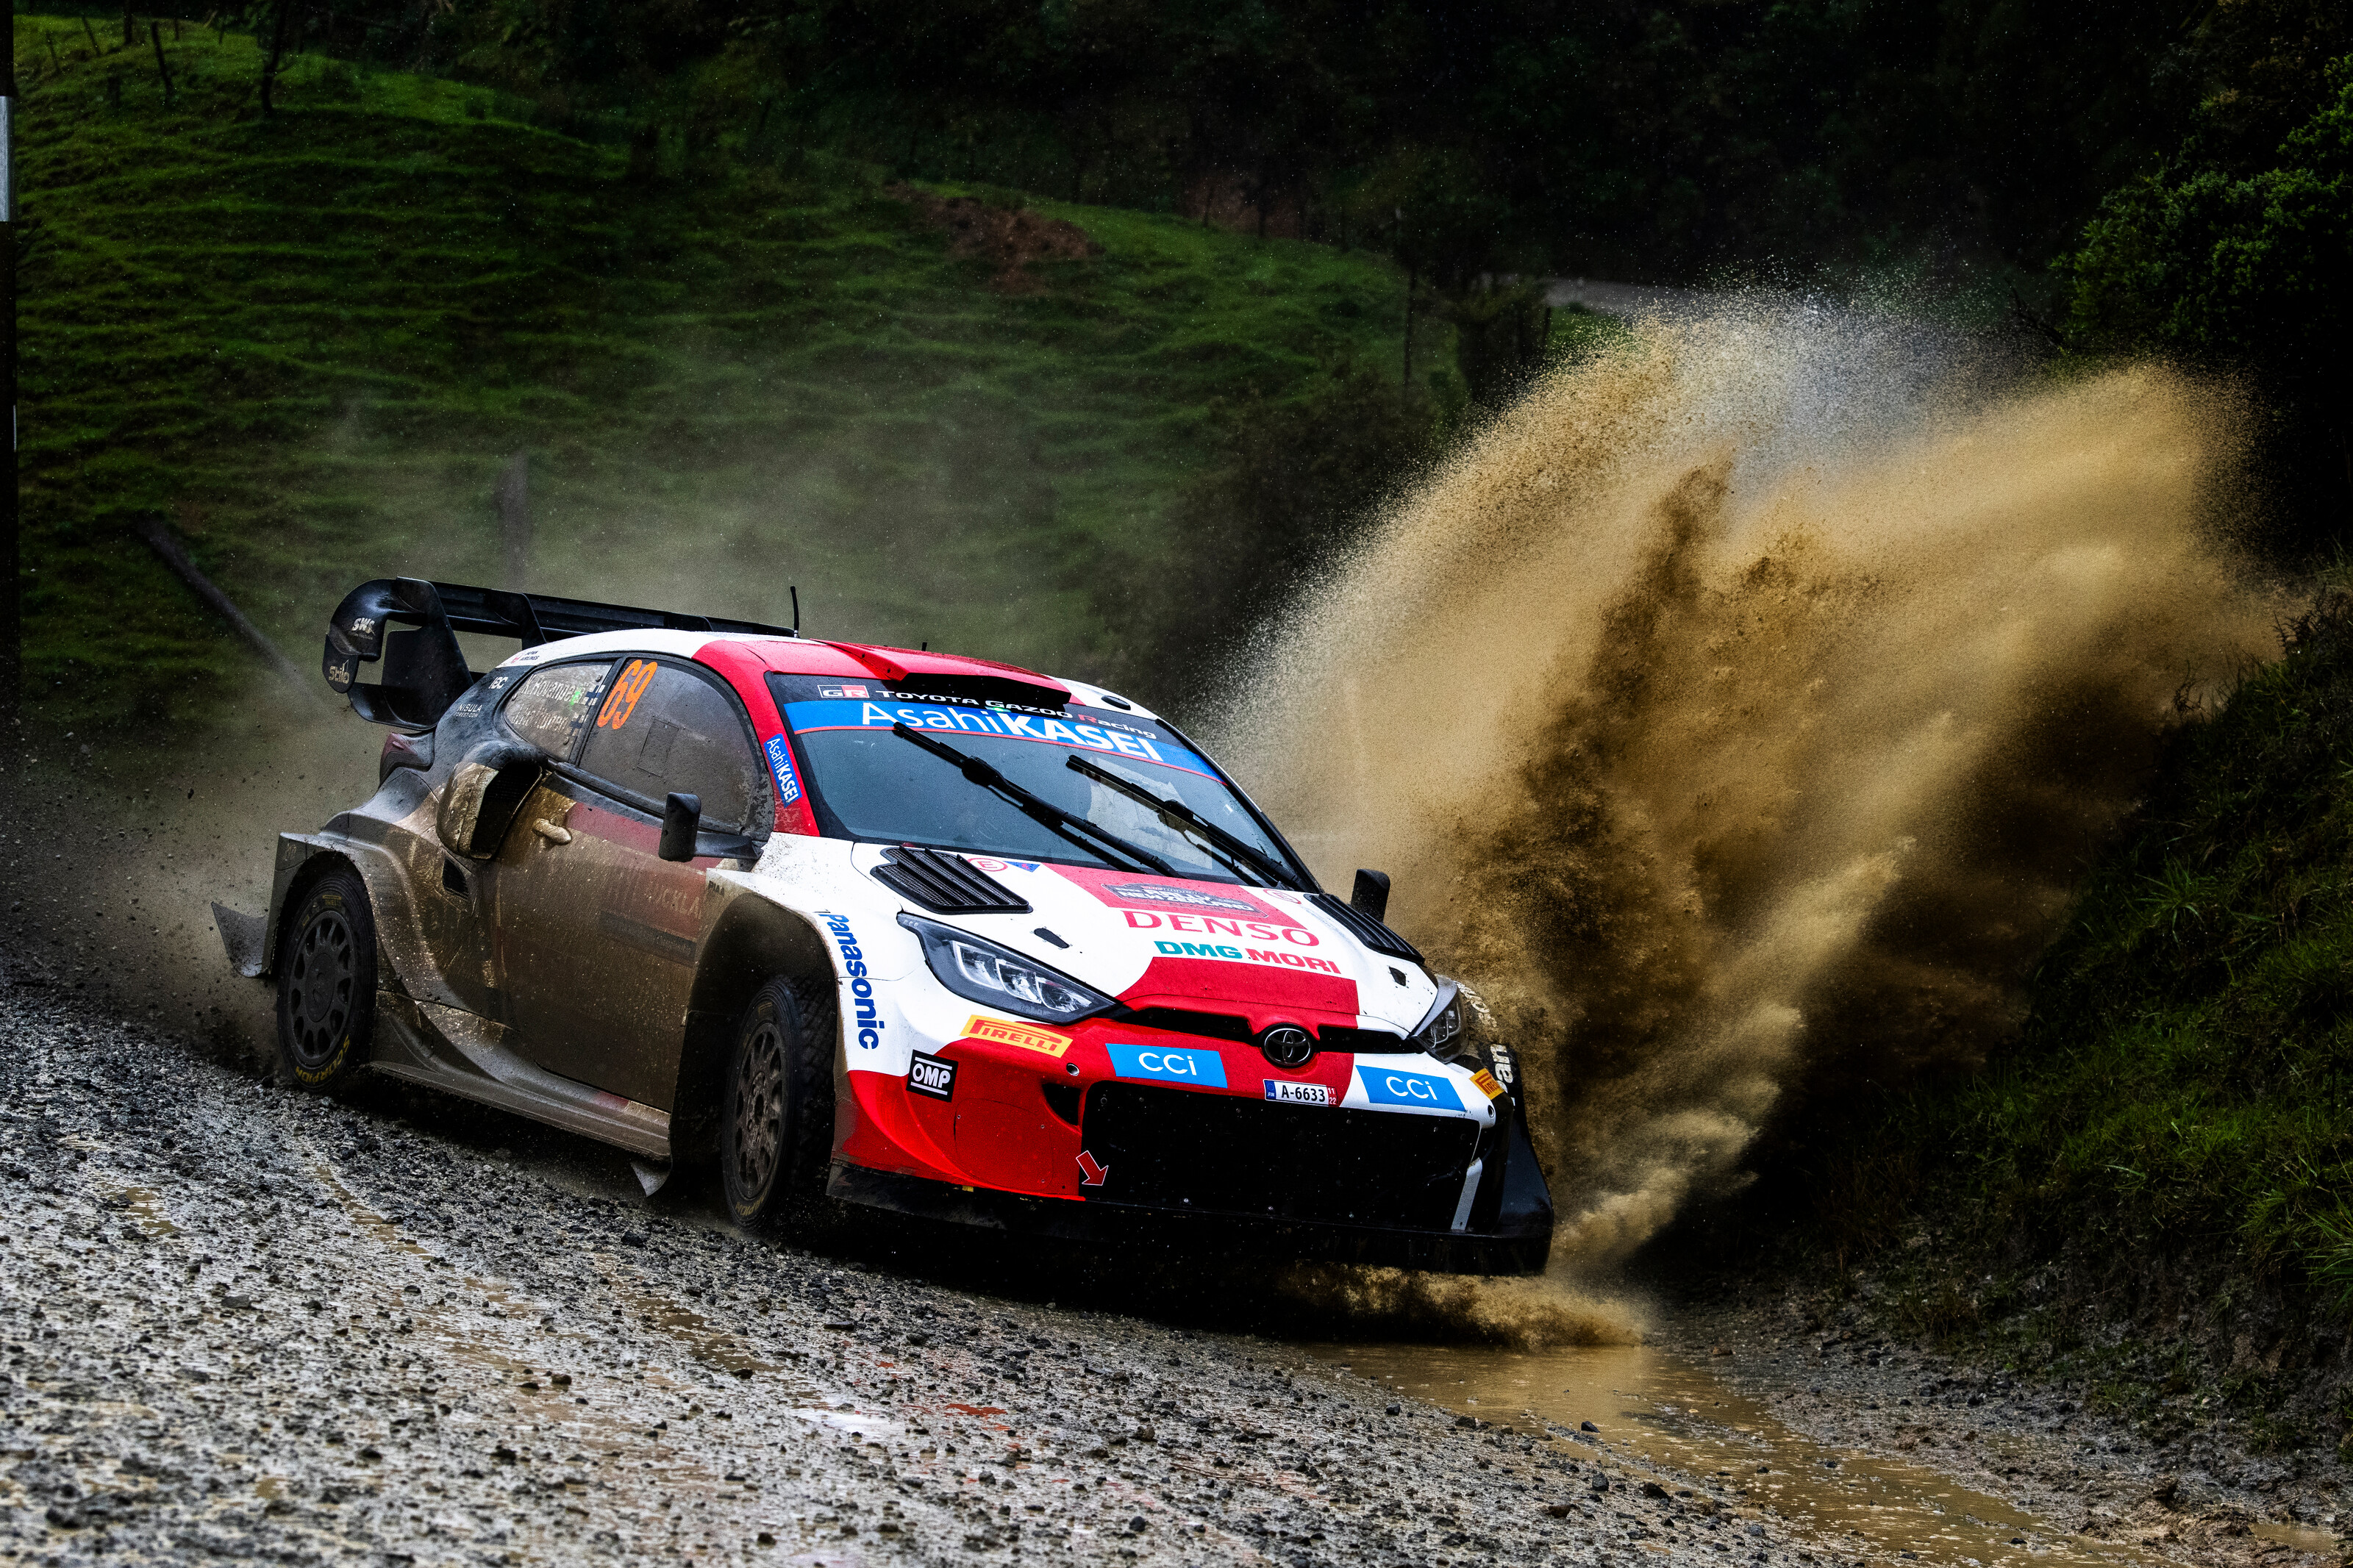 WRC - Rovanperä tops Rally New Zealand and closes in on WRC title |  Federation Internationale de l'Automobile